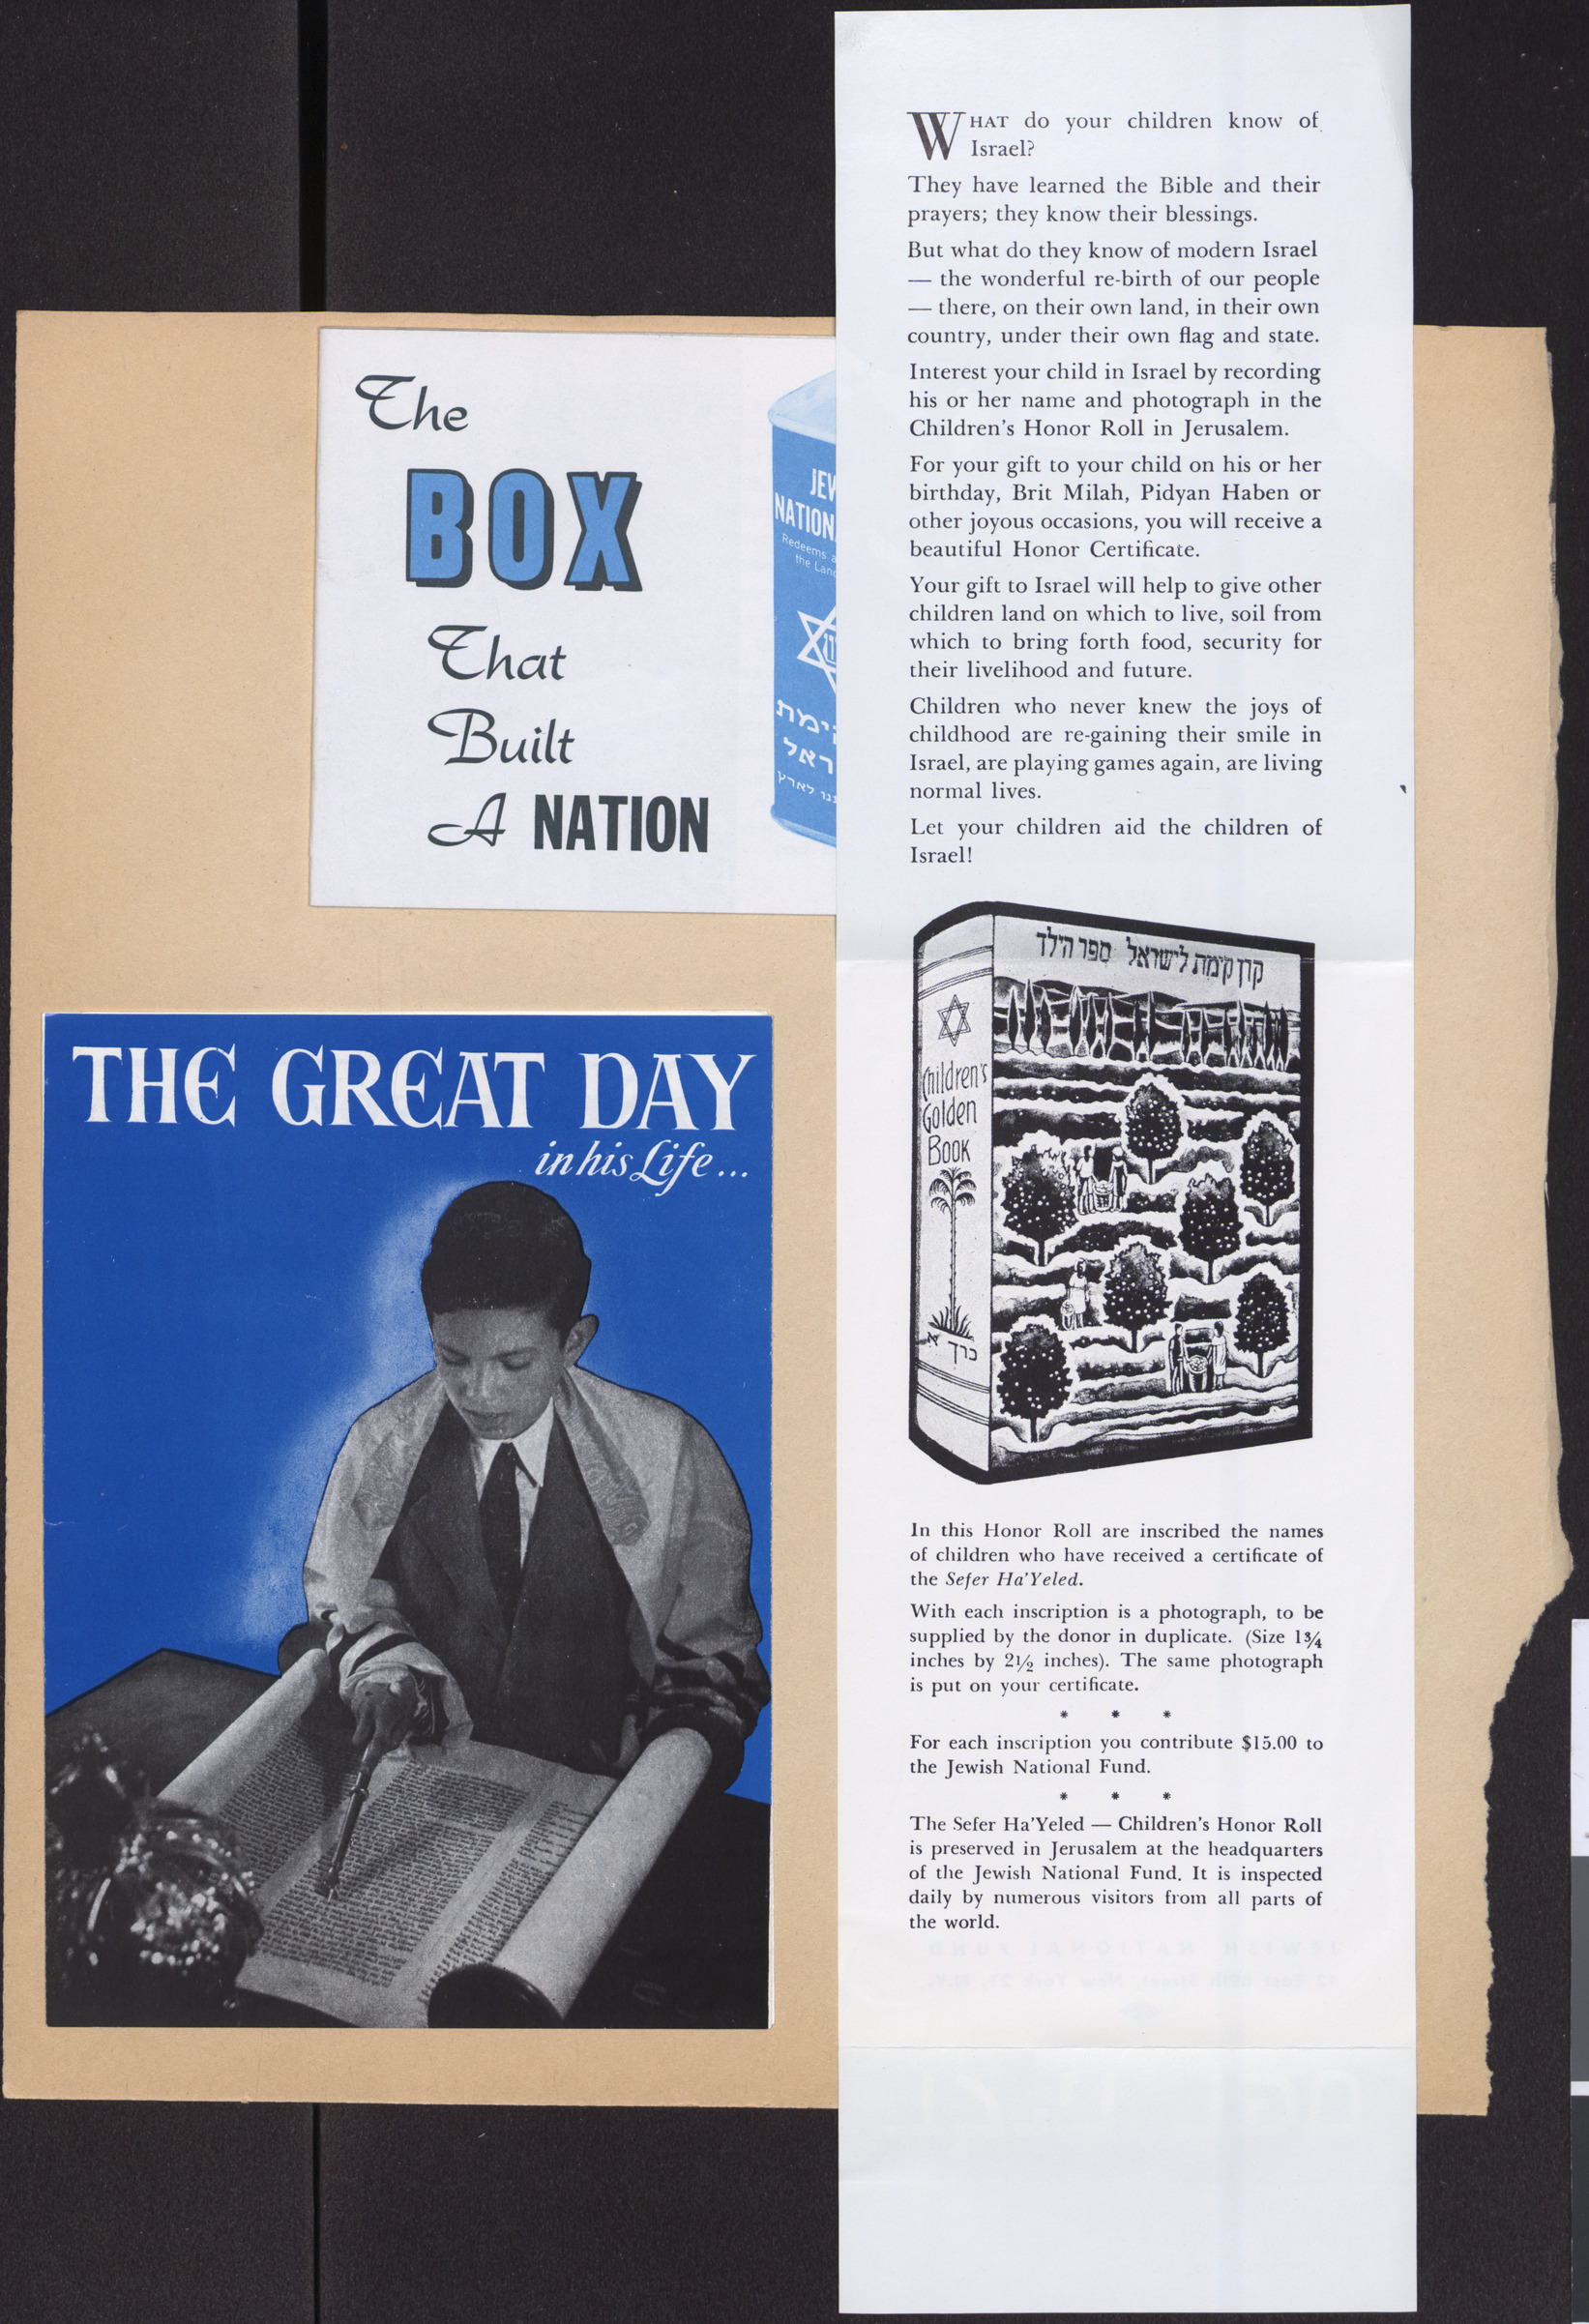 Pamphlets, The Box That Built a Nation, Jewish National Fund (cover), and The Great Day in his Life (cover), and Their Own Record, The Children's Honor Roll (open)